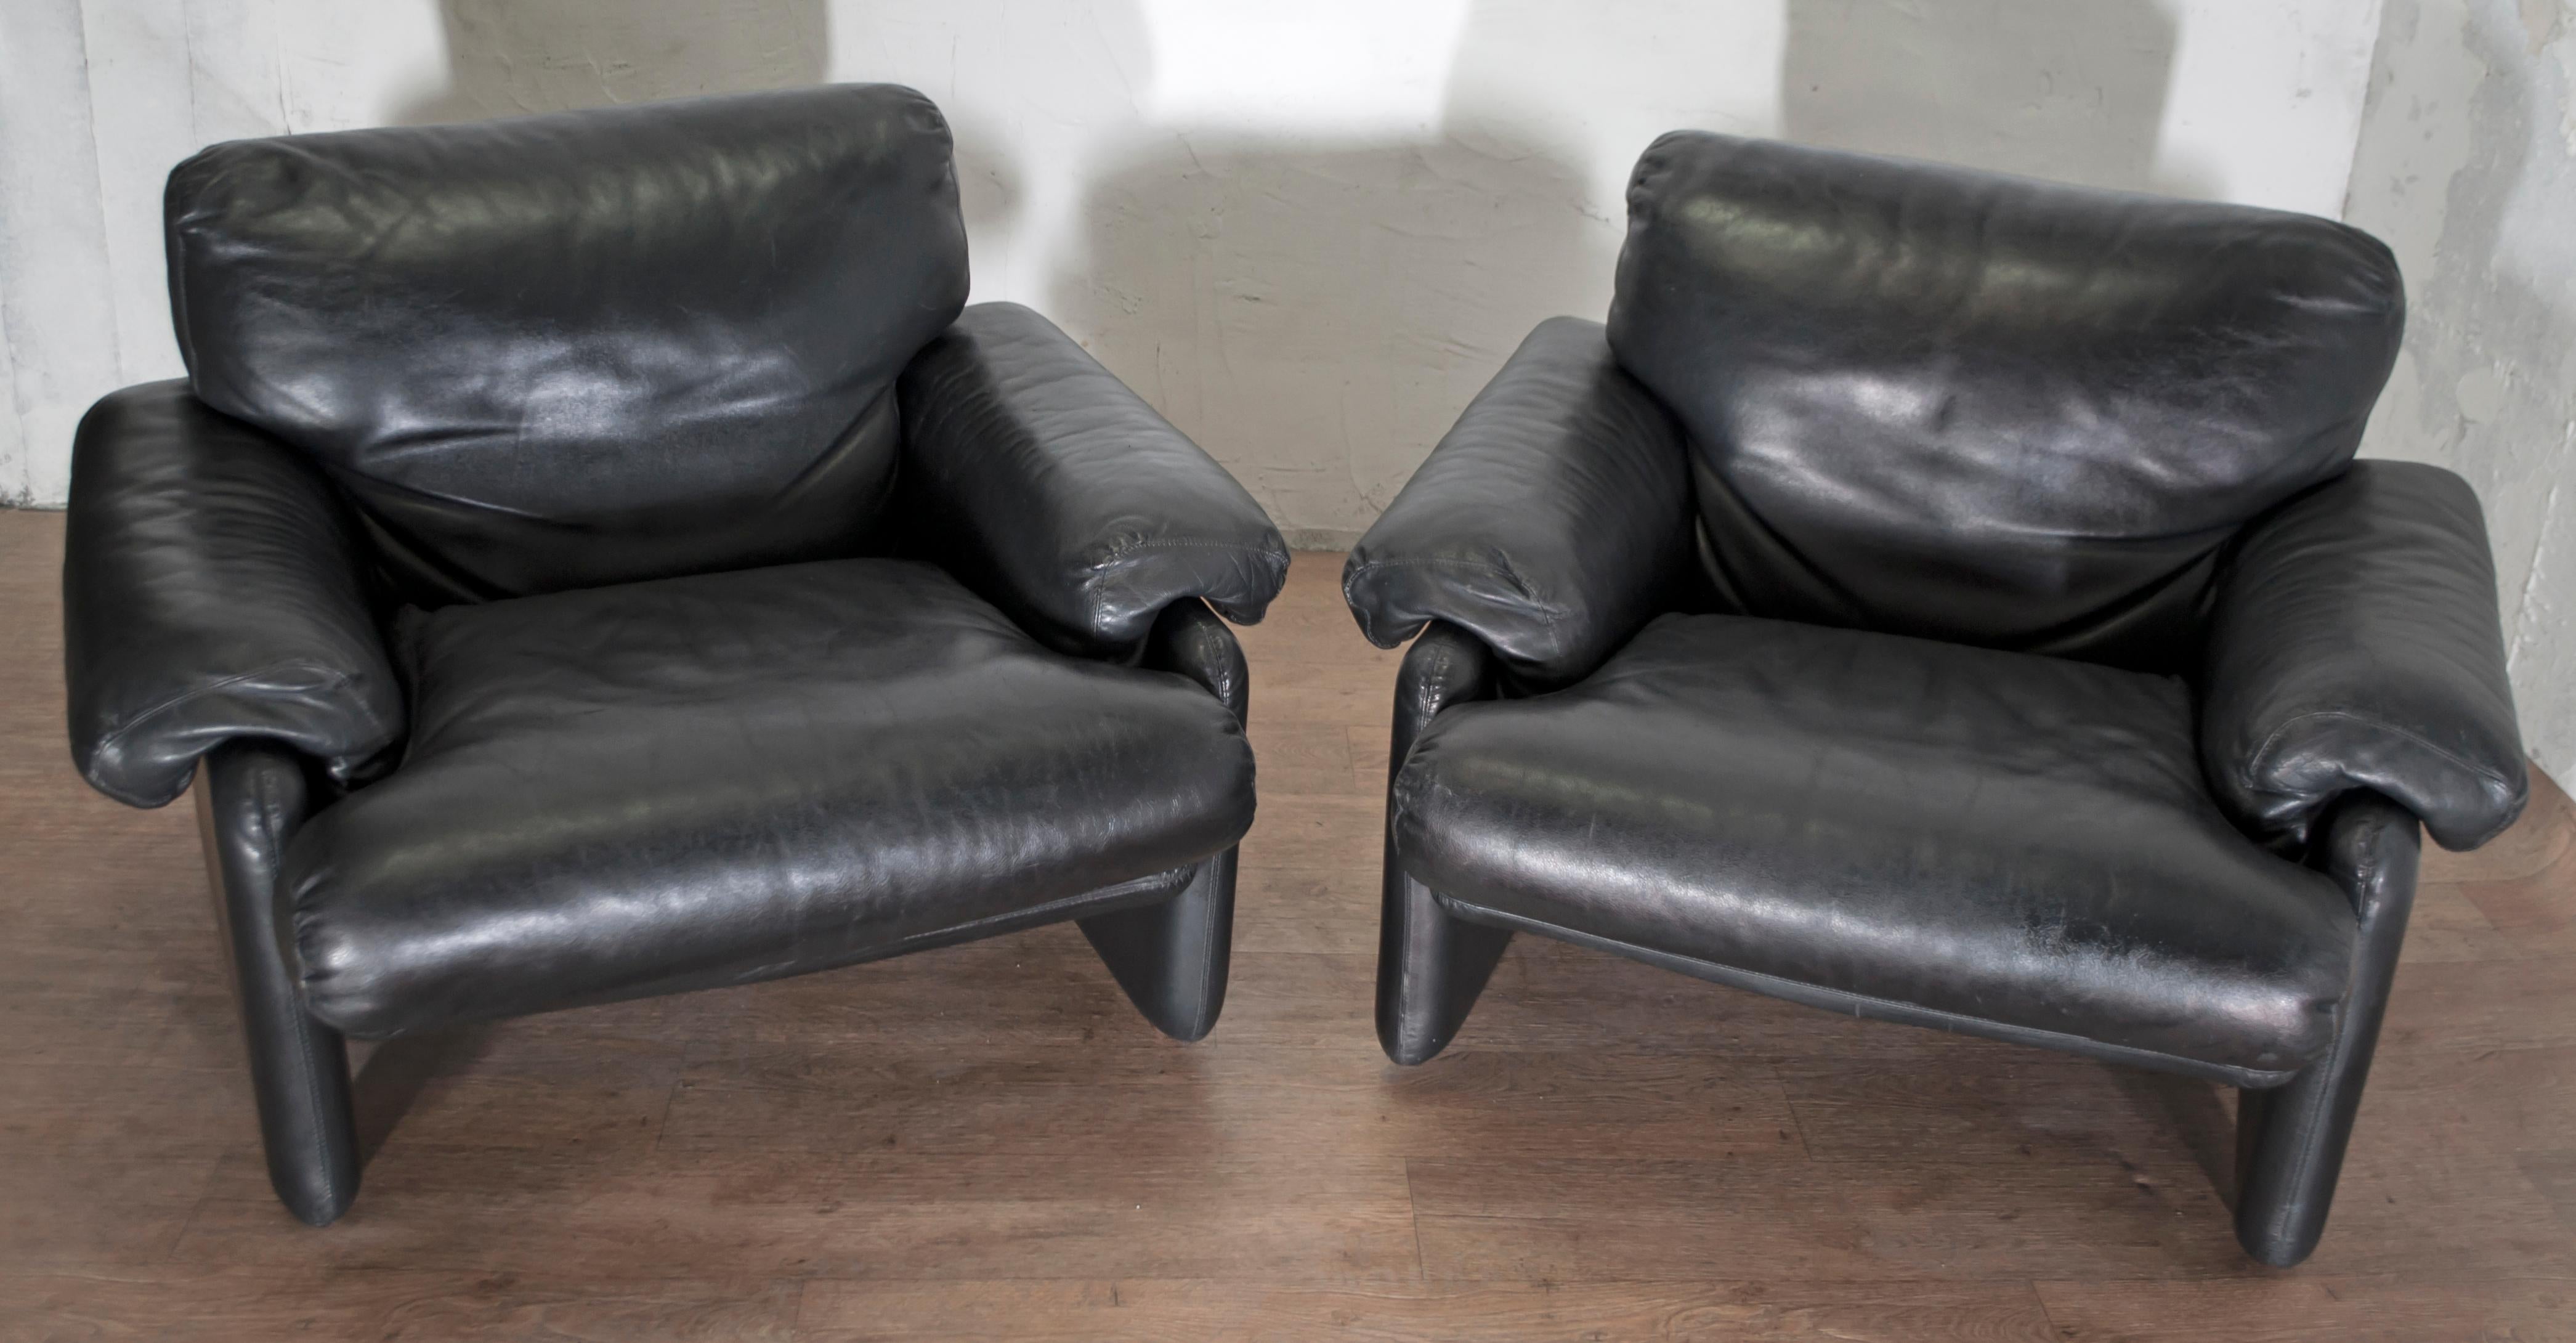 This pair of armchairs upholstered in genuine black leather were designed by Tobia & Afra Scarpa and produced by B&B Italia in the 1960s, using the injection molding technology discovered in London by Busnelli.